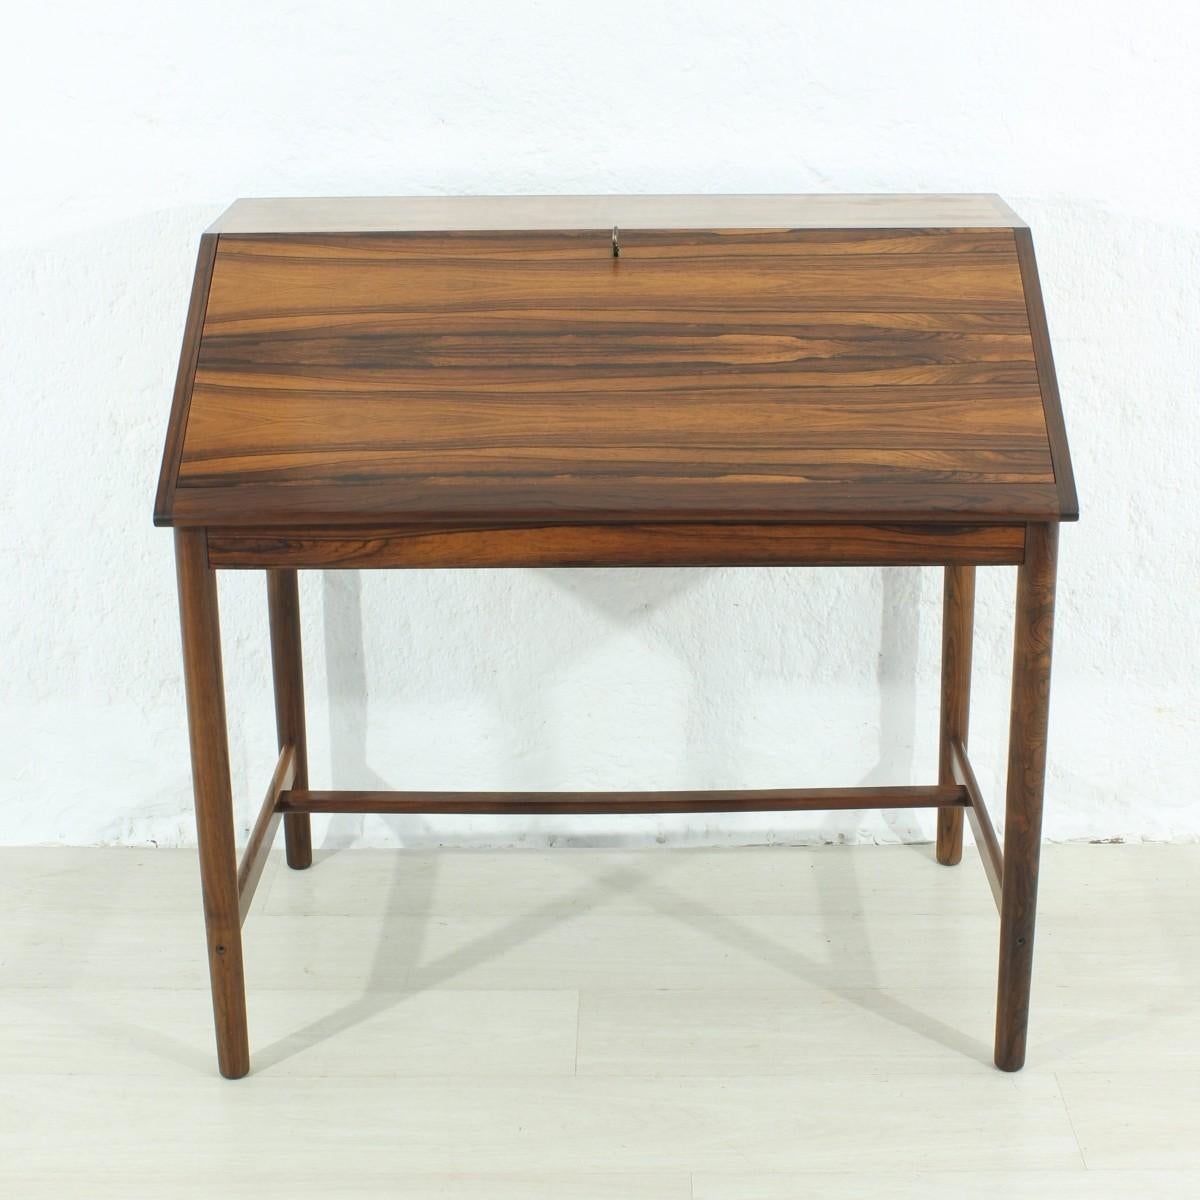 Material: rosewood, veneered and solid
small veneer damage to the base, so little visible that it is not photographically representable.
Original condition, cleaned and oiled.